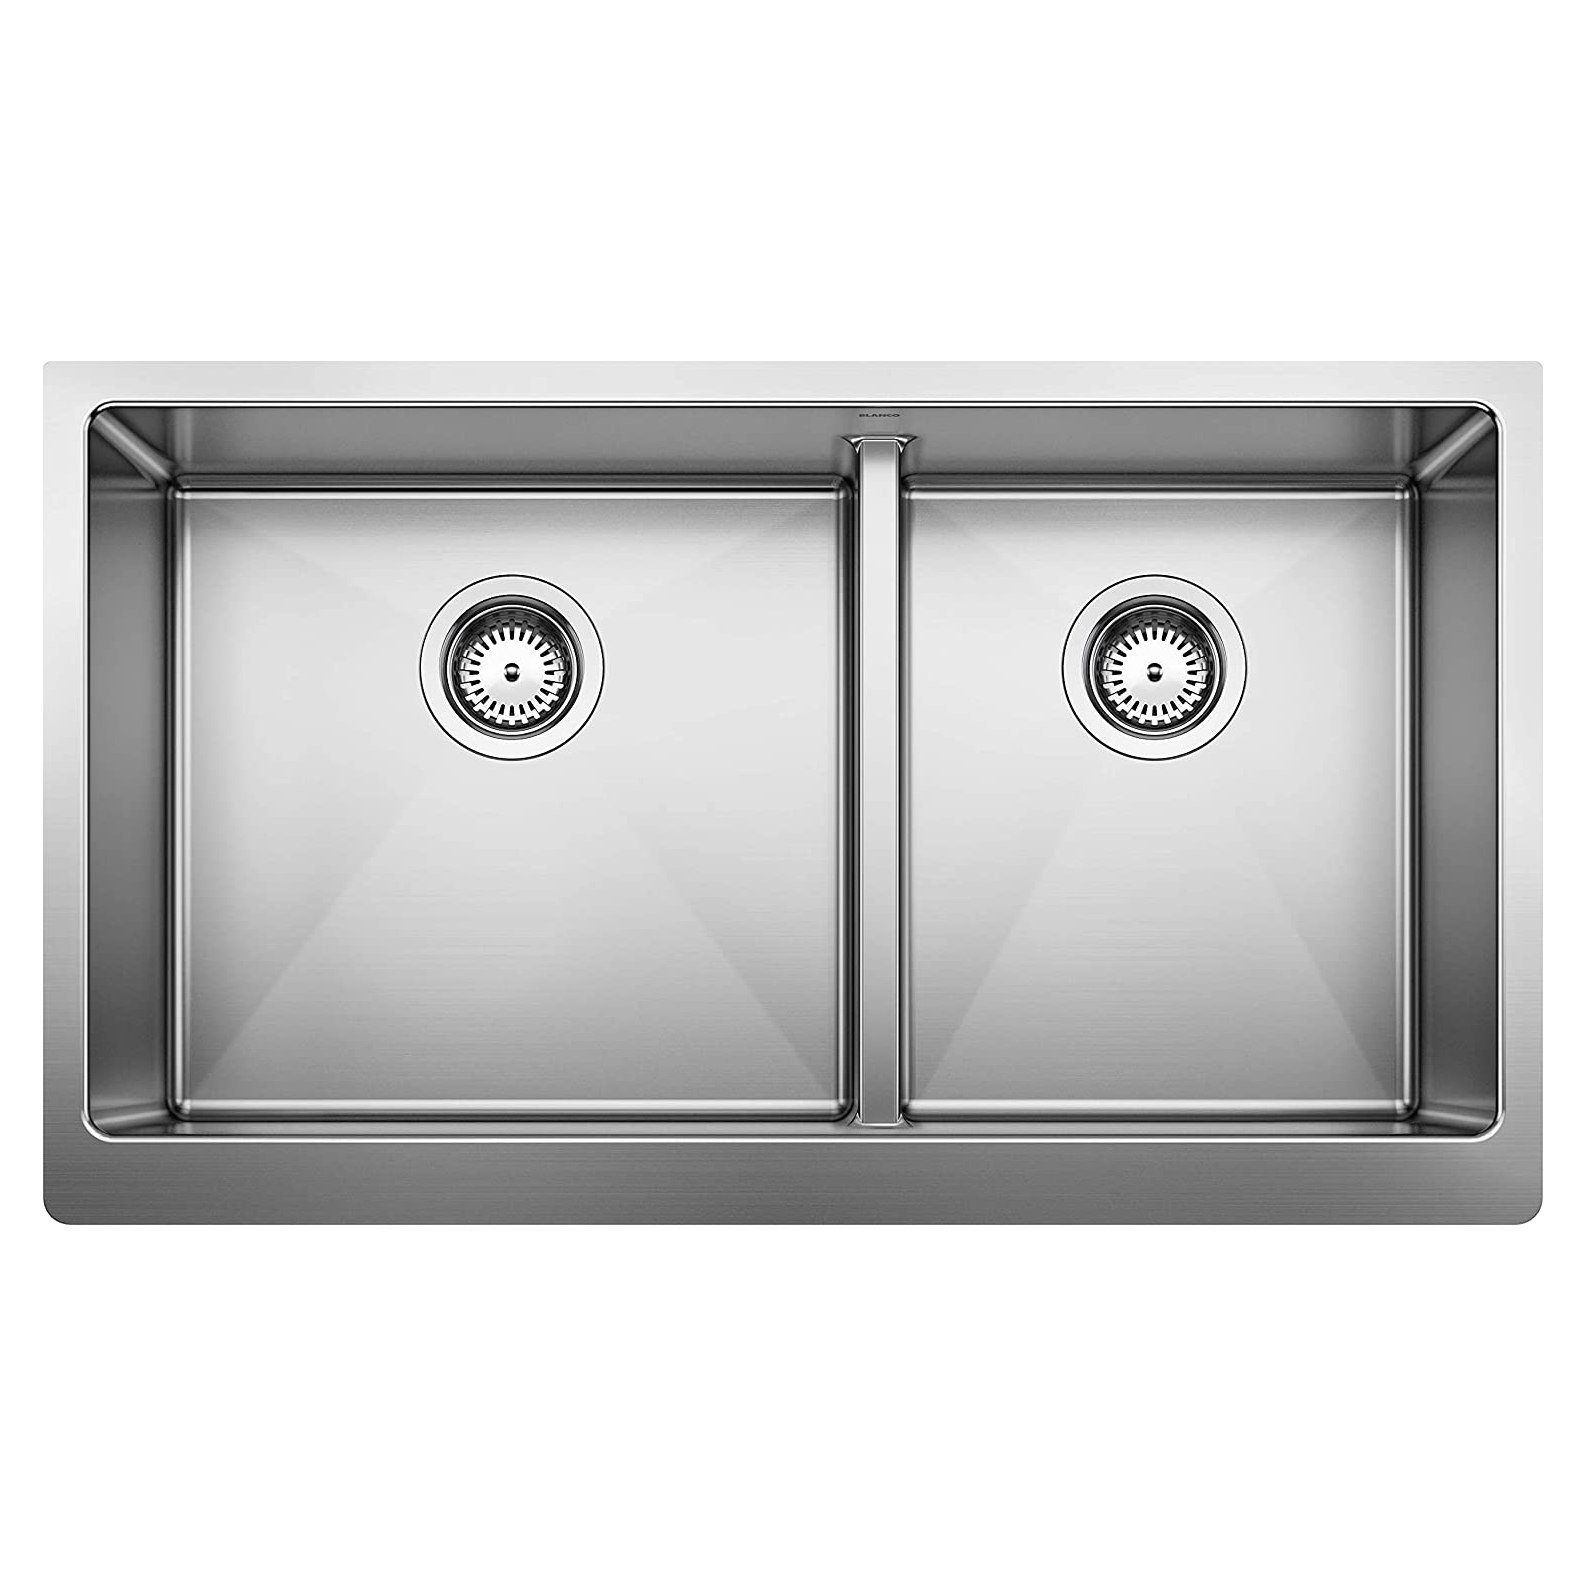 Quatrus R15 33x19x9" Stainless Steel Equal Double Bowl Sink